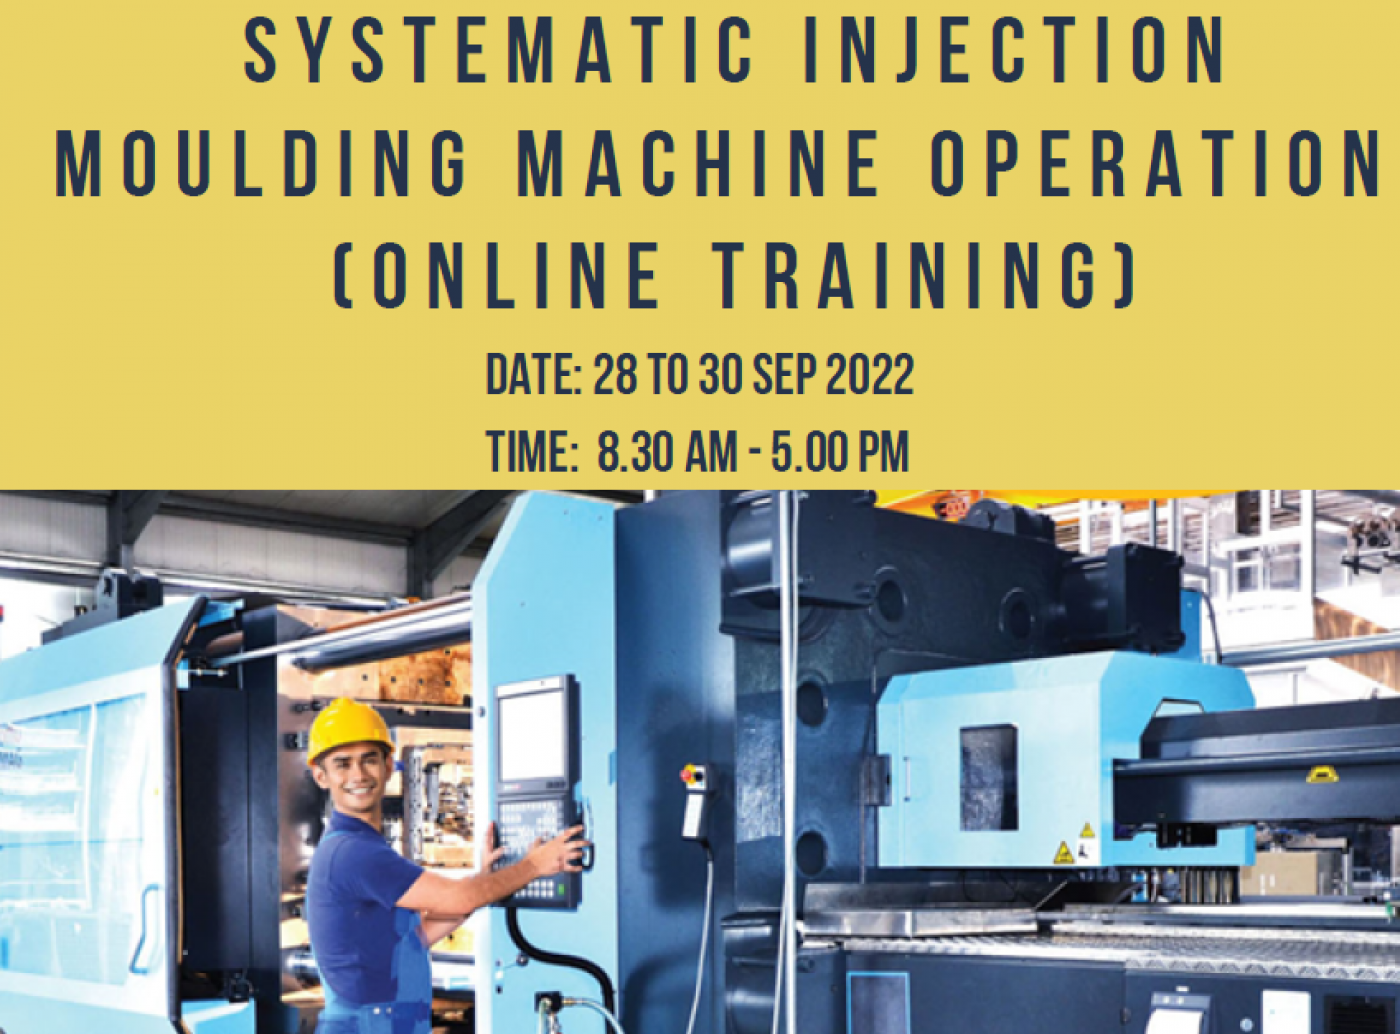 Systematic Injection Moulding Machine Operation (Online Training)